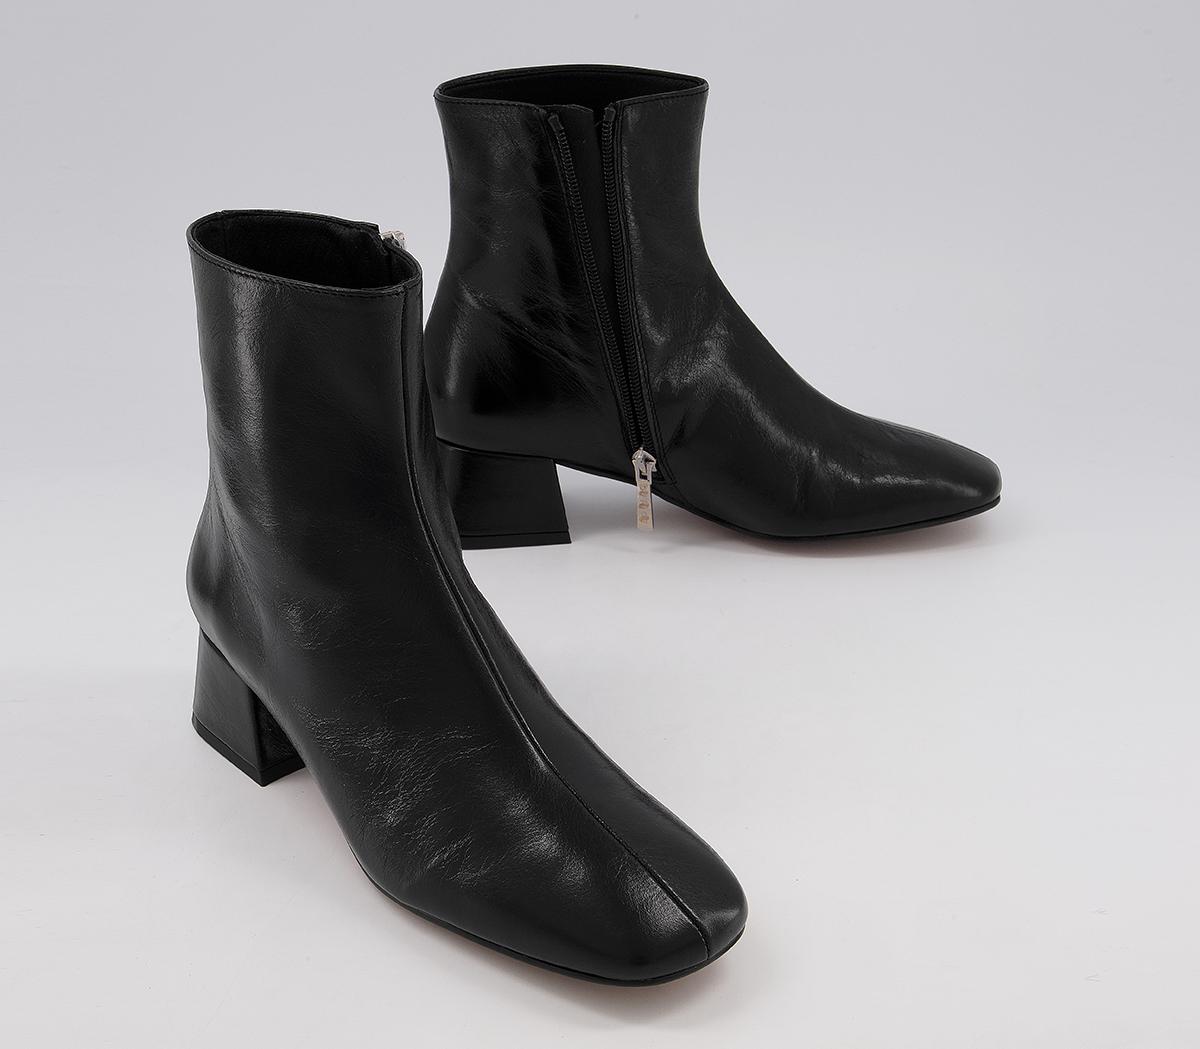 OFFICE Approval Low Square Toe Boots Black Leather - Women's Ankle Boots